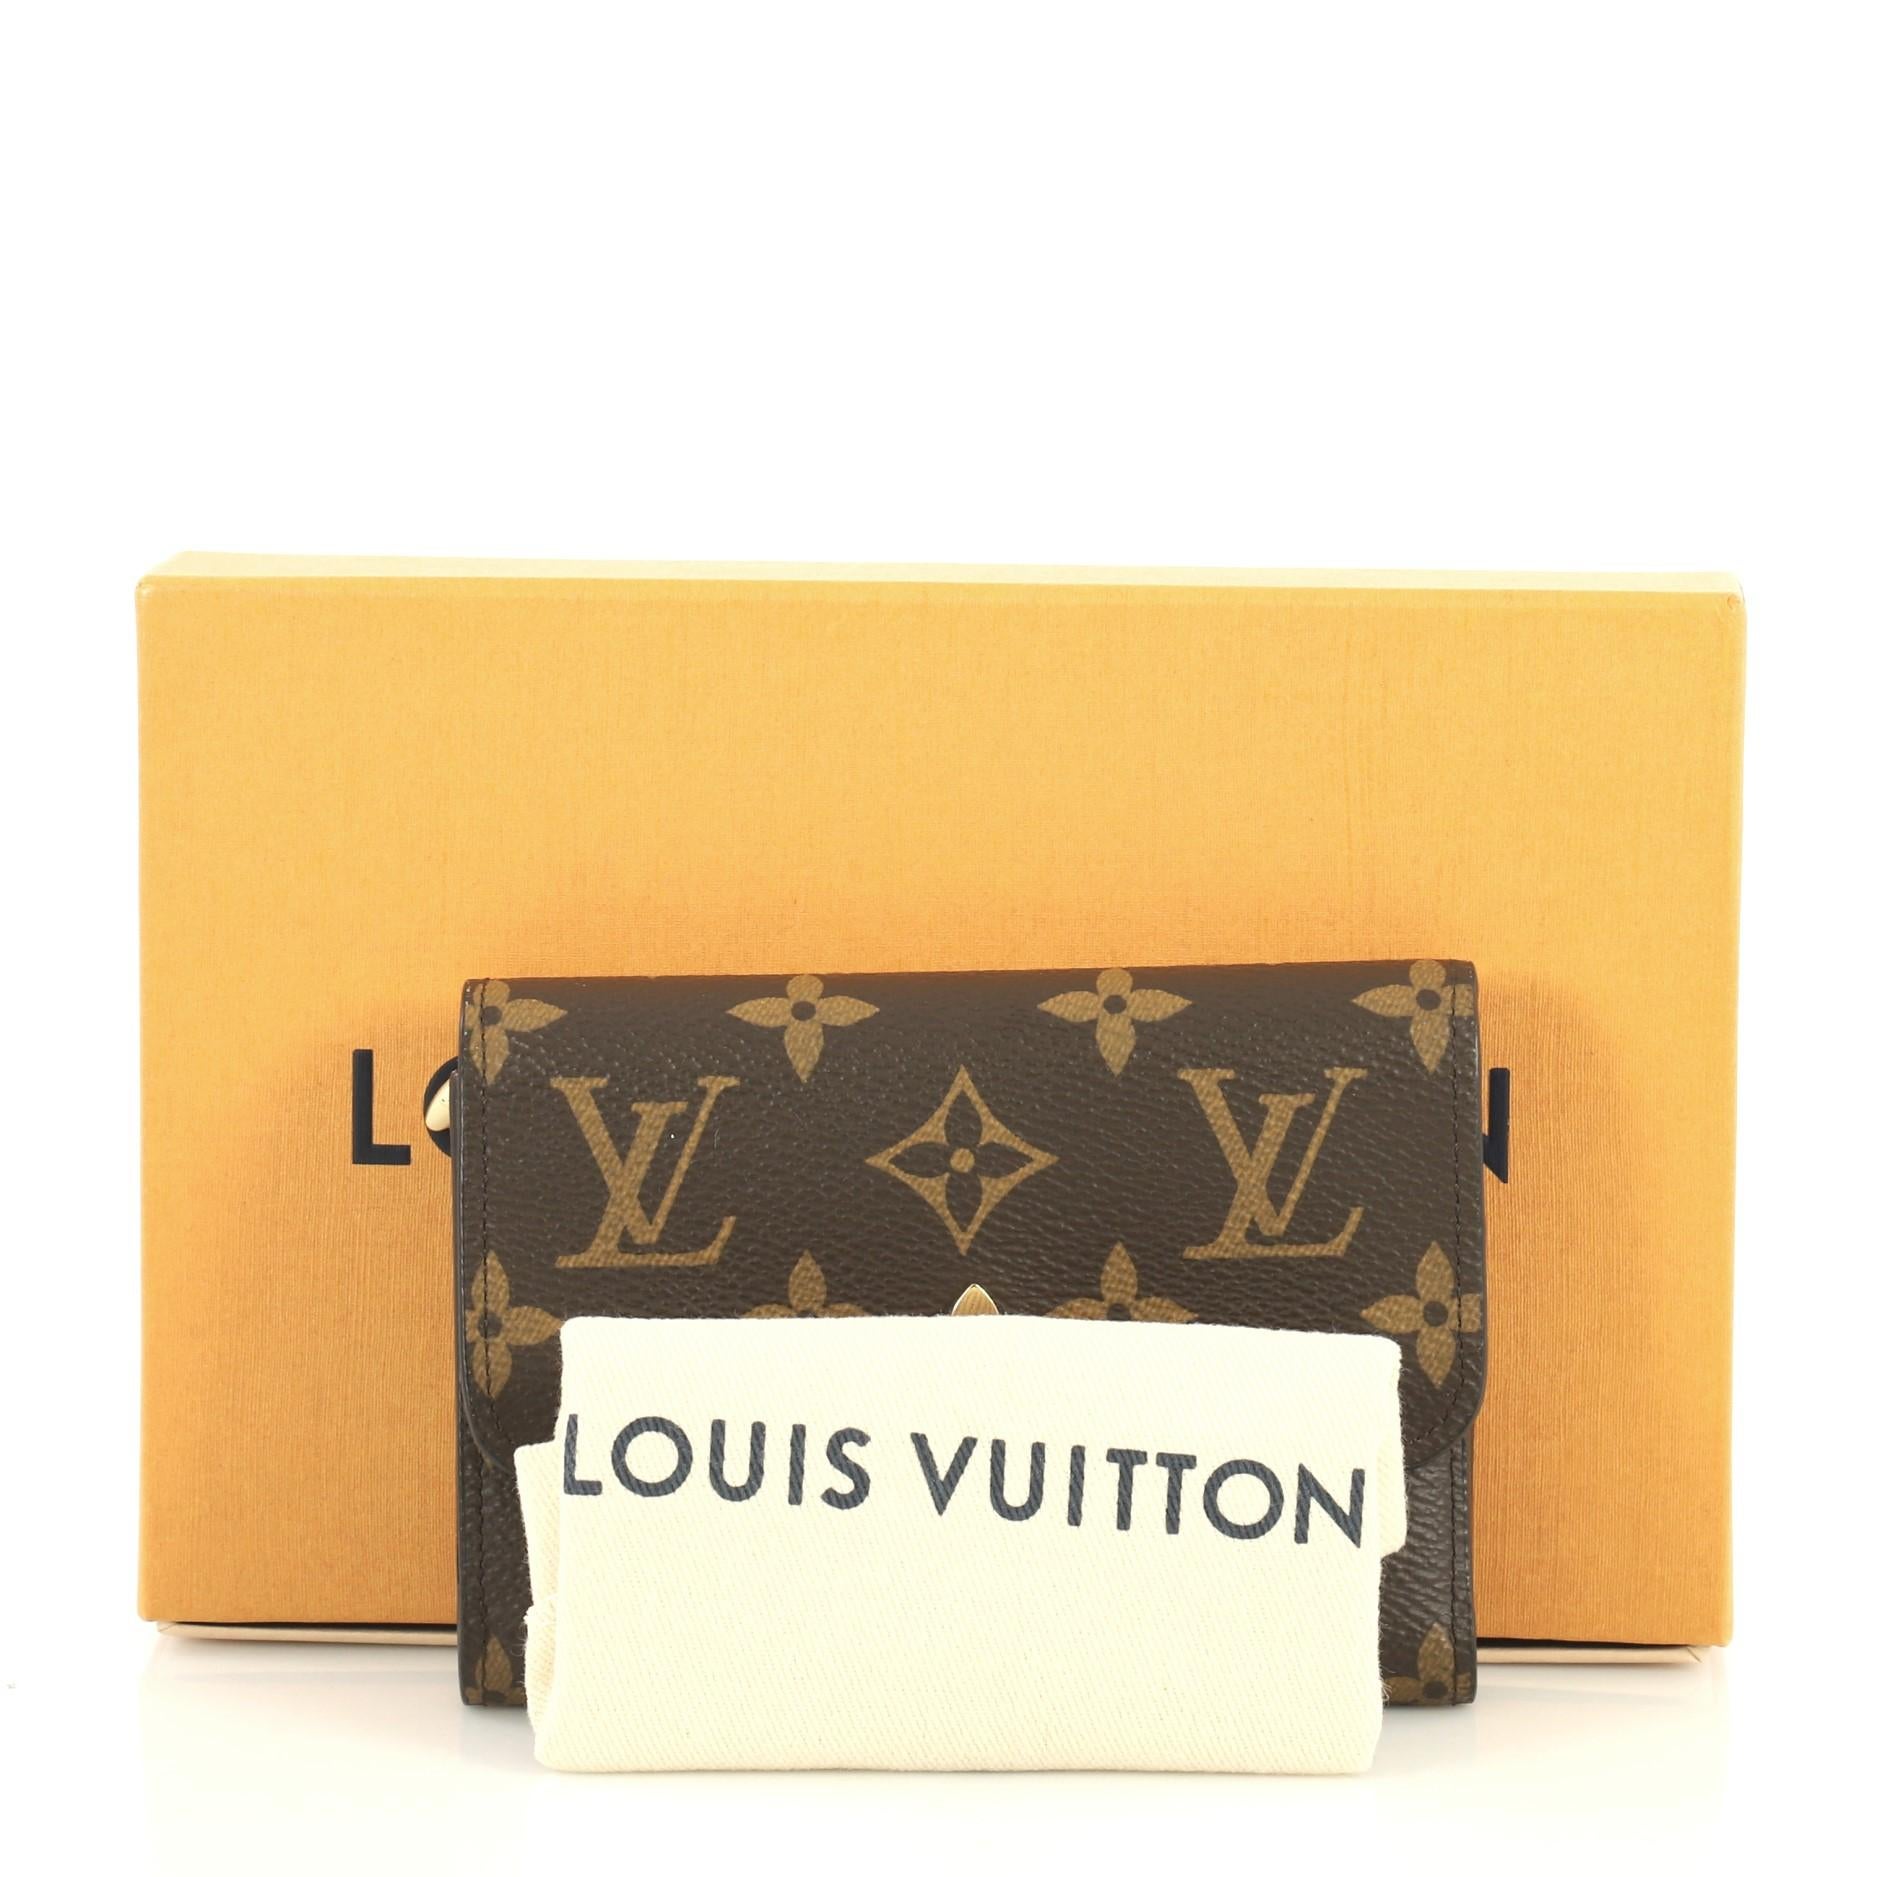 This Louis Vuitton Flower Compact Wallet Monogram Canvas, crafted in brown monogram coated canvas, features a monogram flower with padlock and gold-tone hardware. Its flap top with snap closure opens to a black leather interior with multiple card